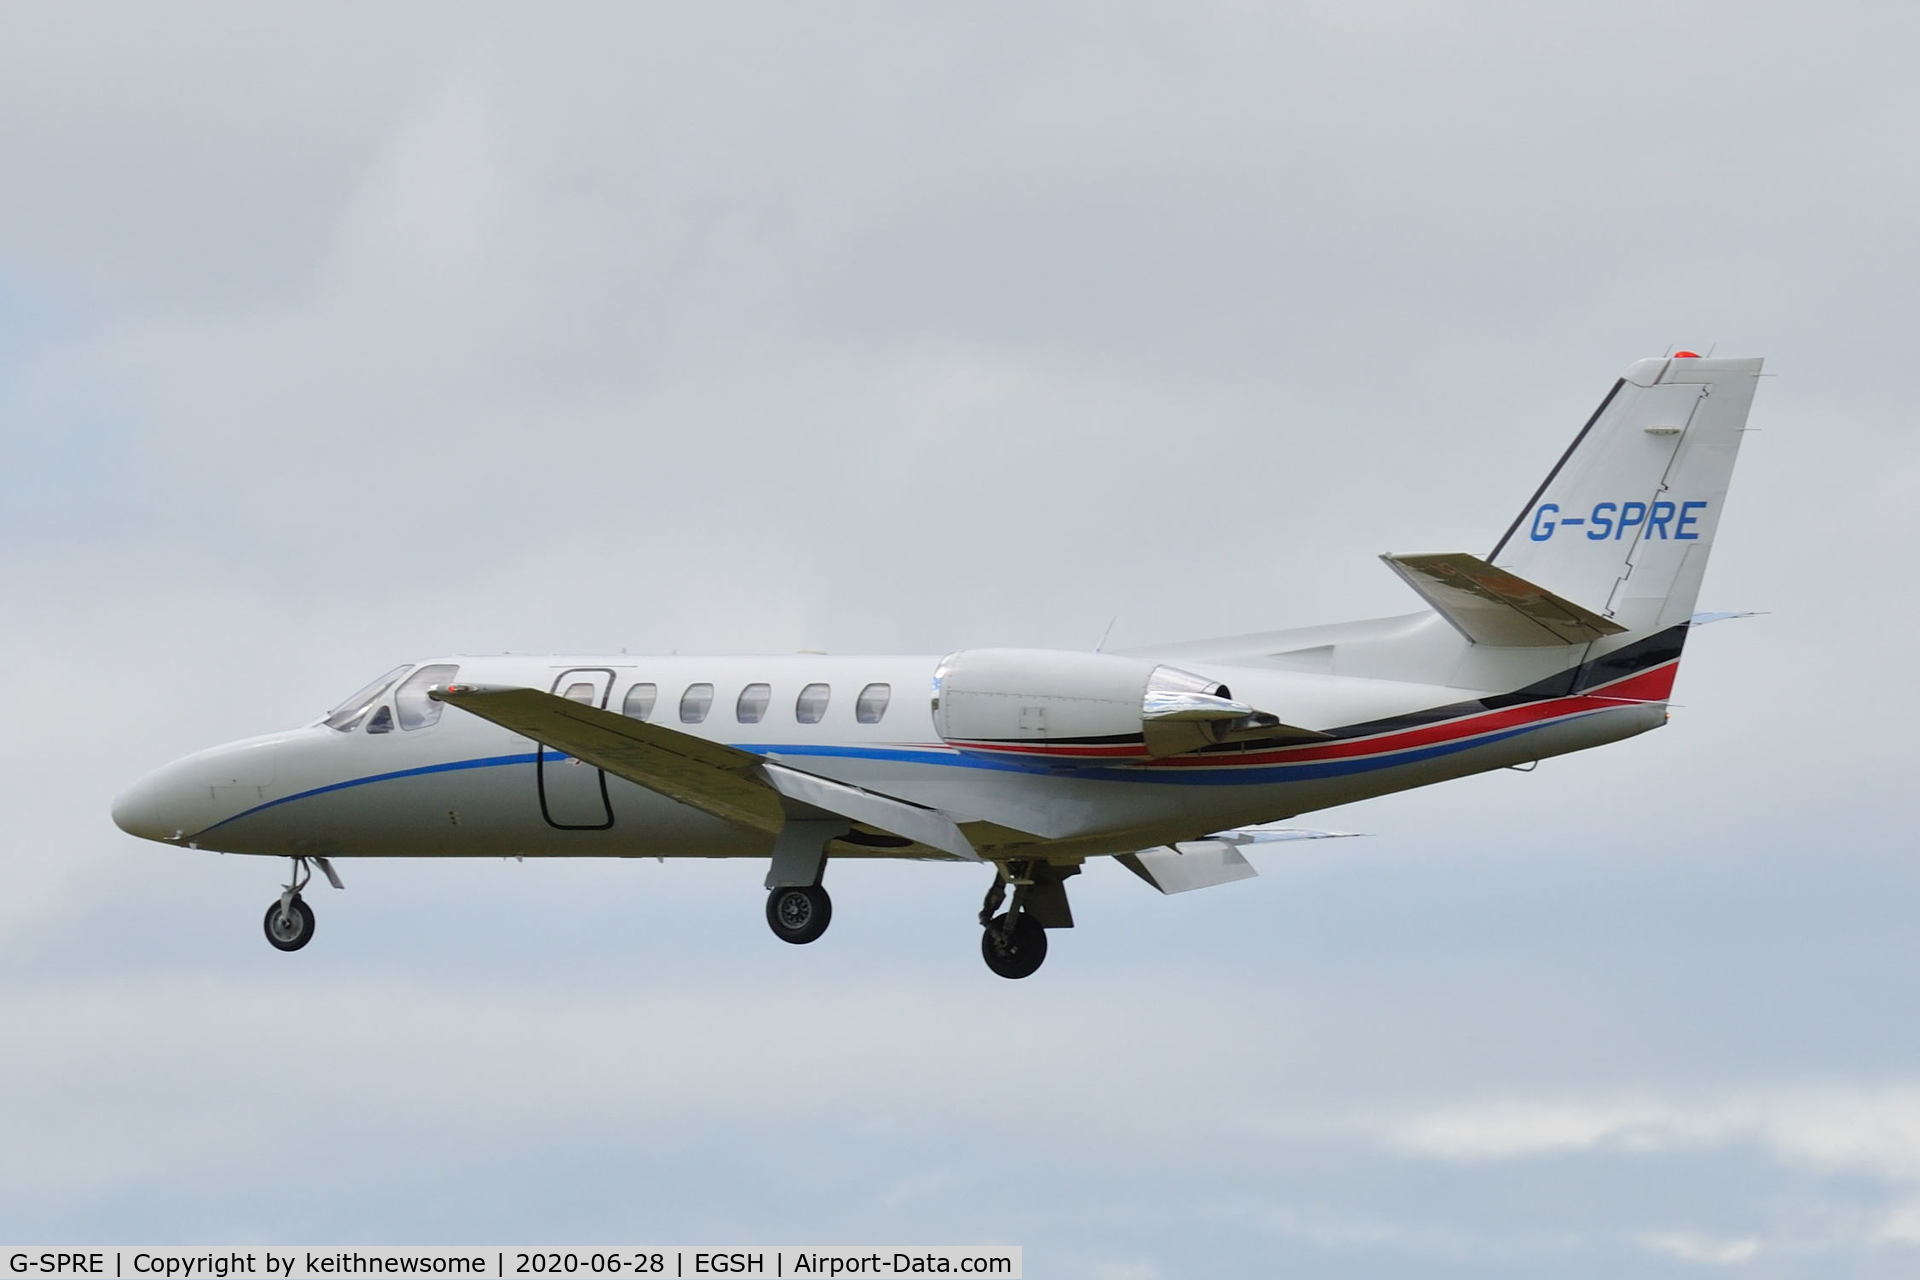 G-SPRE, 1999 Cessna 550 Citation Bravo C/N 550-0872, arriving at Norwich from Belfast.